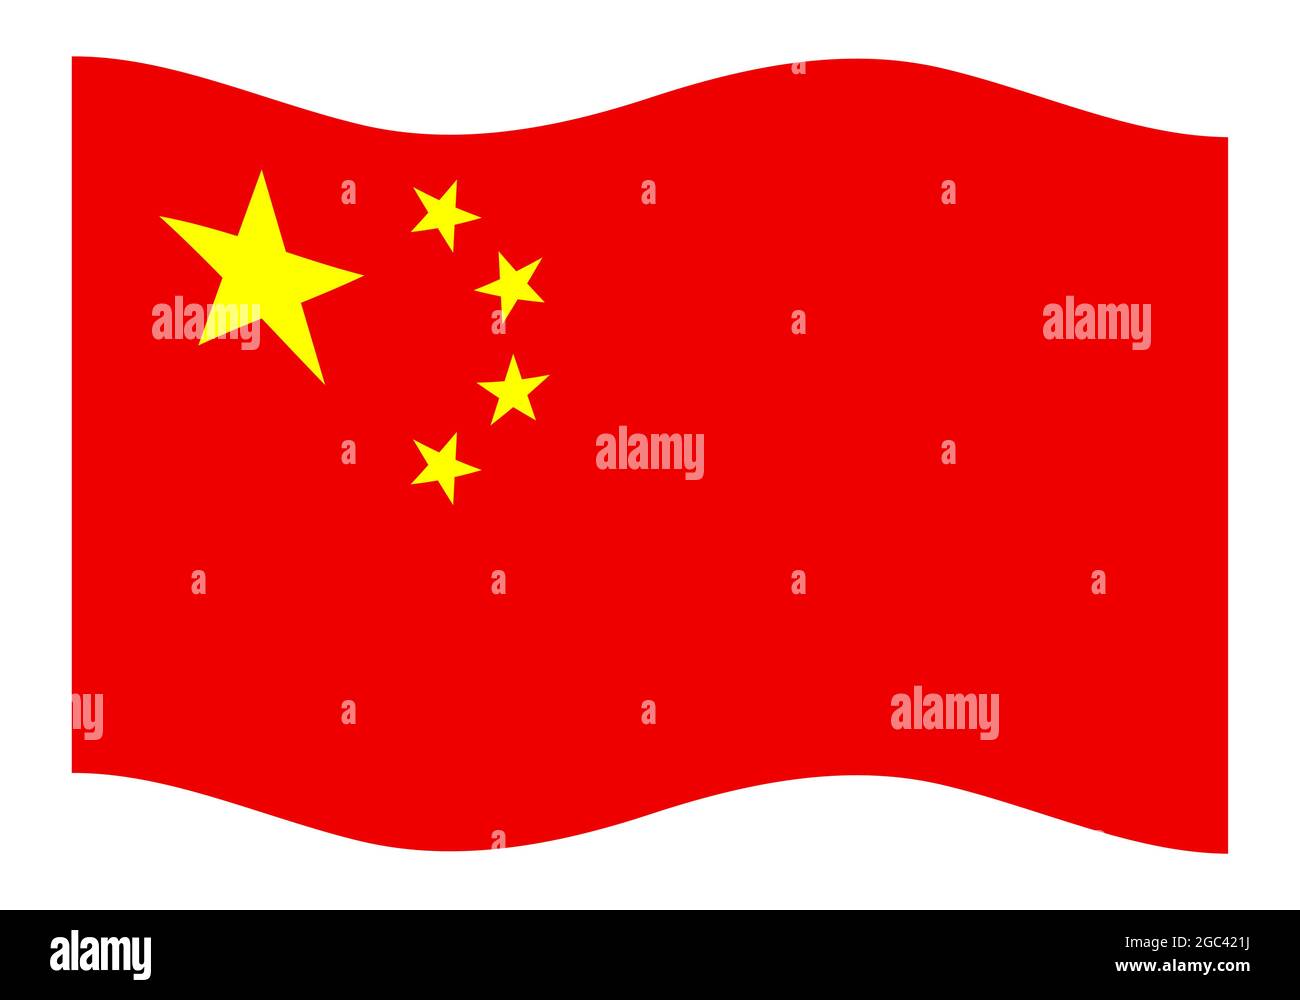 National Flag of the People's Republic of China waving illustration Stock Vector